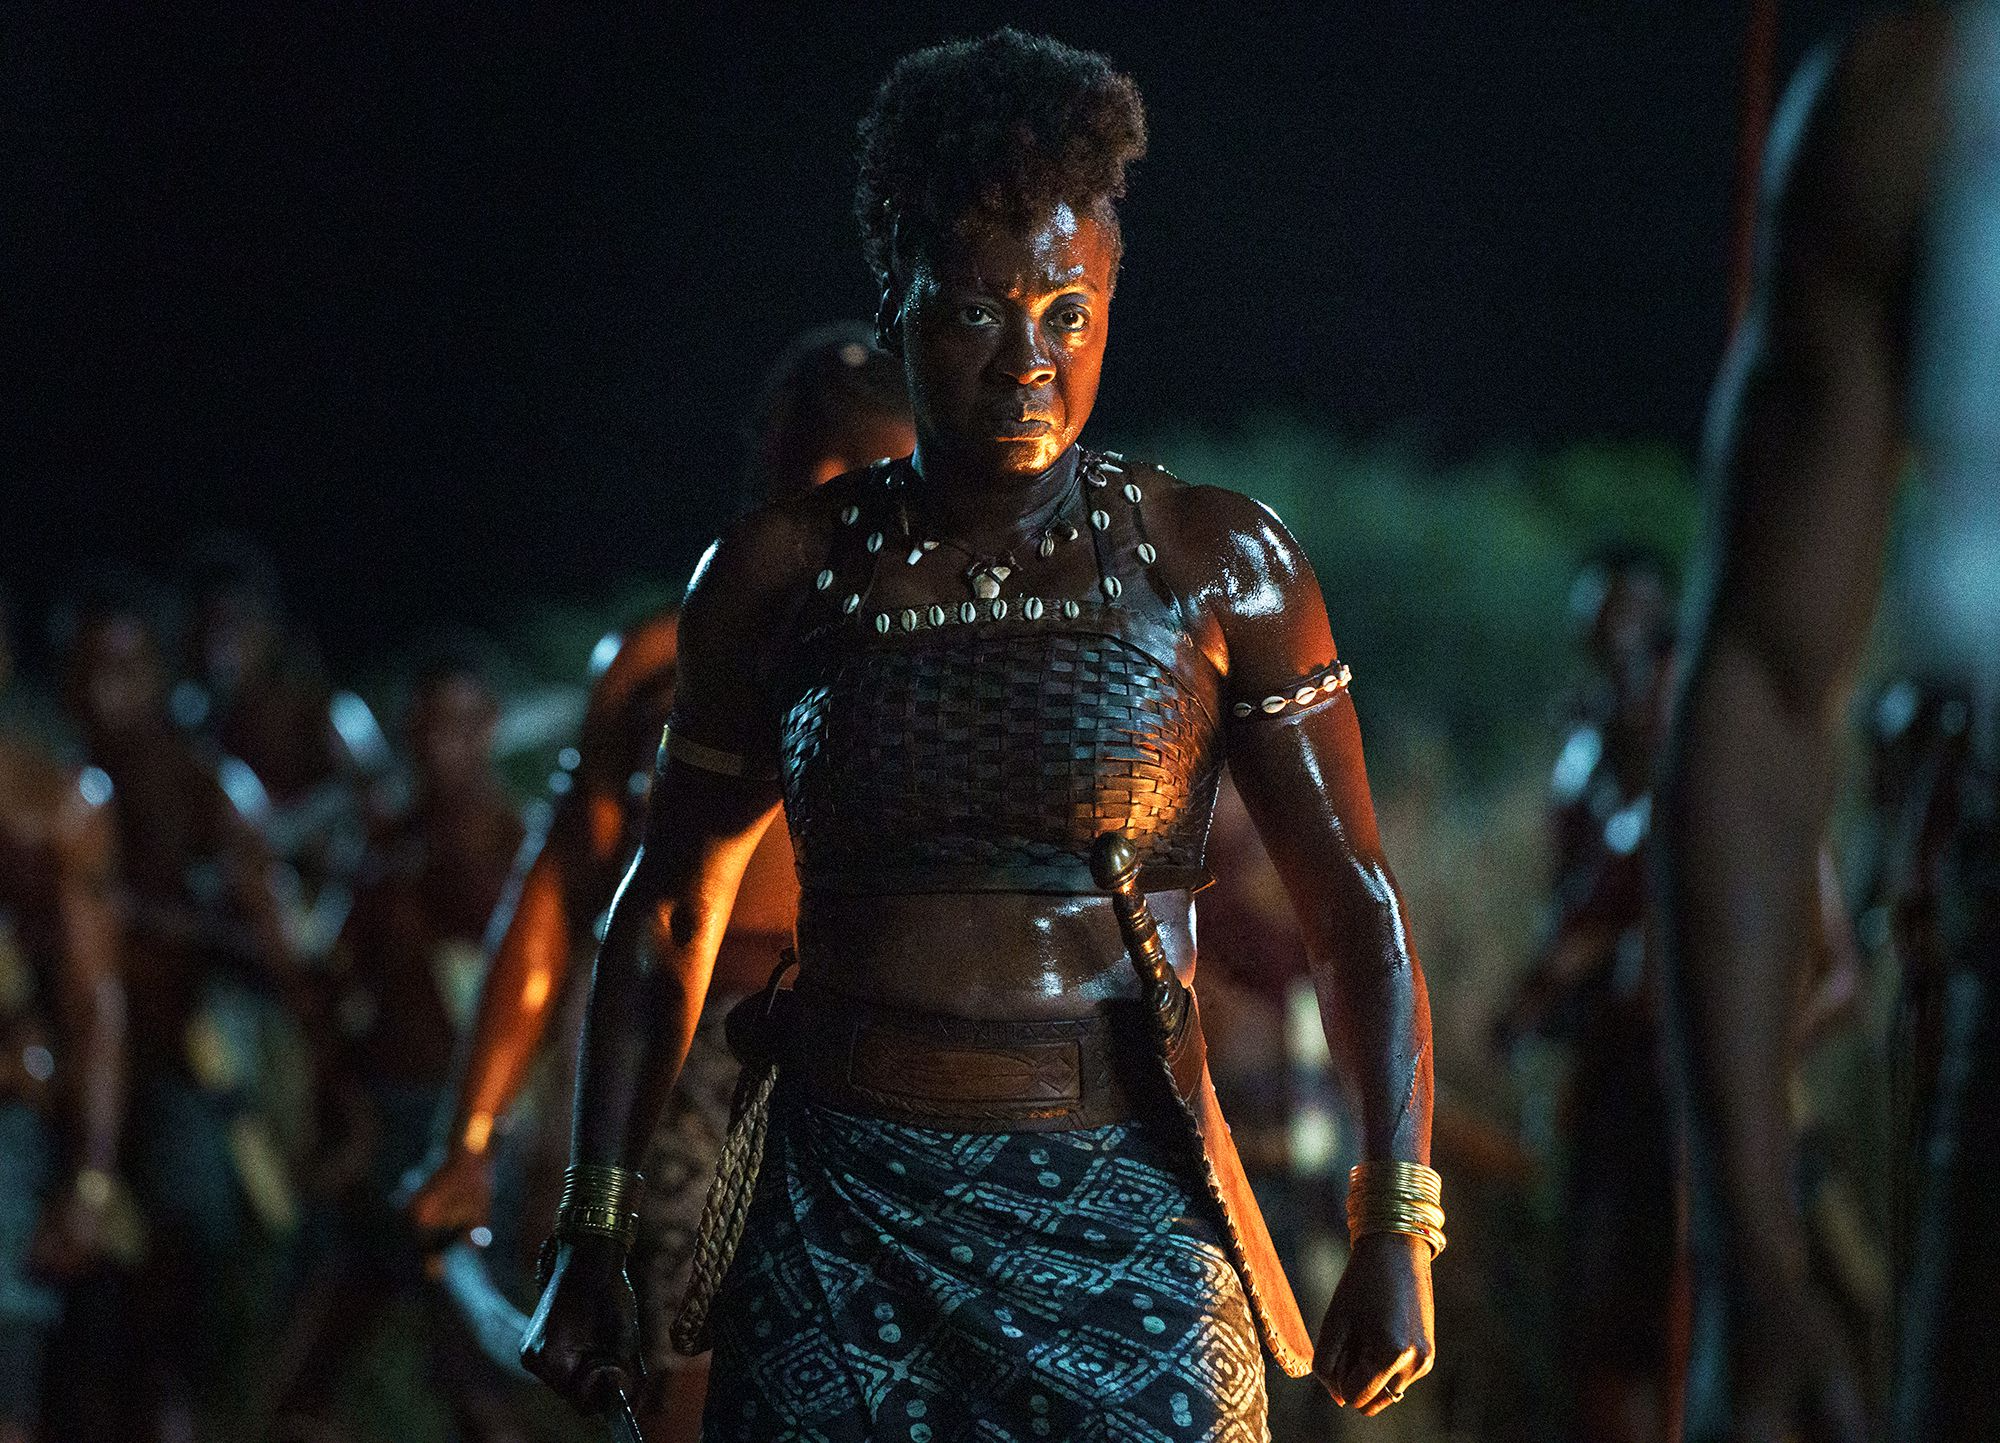 The True Story of 'The Woman King' and the Agojie Warriors